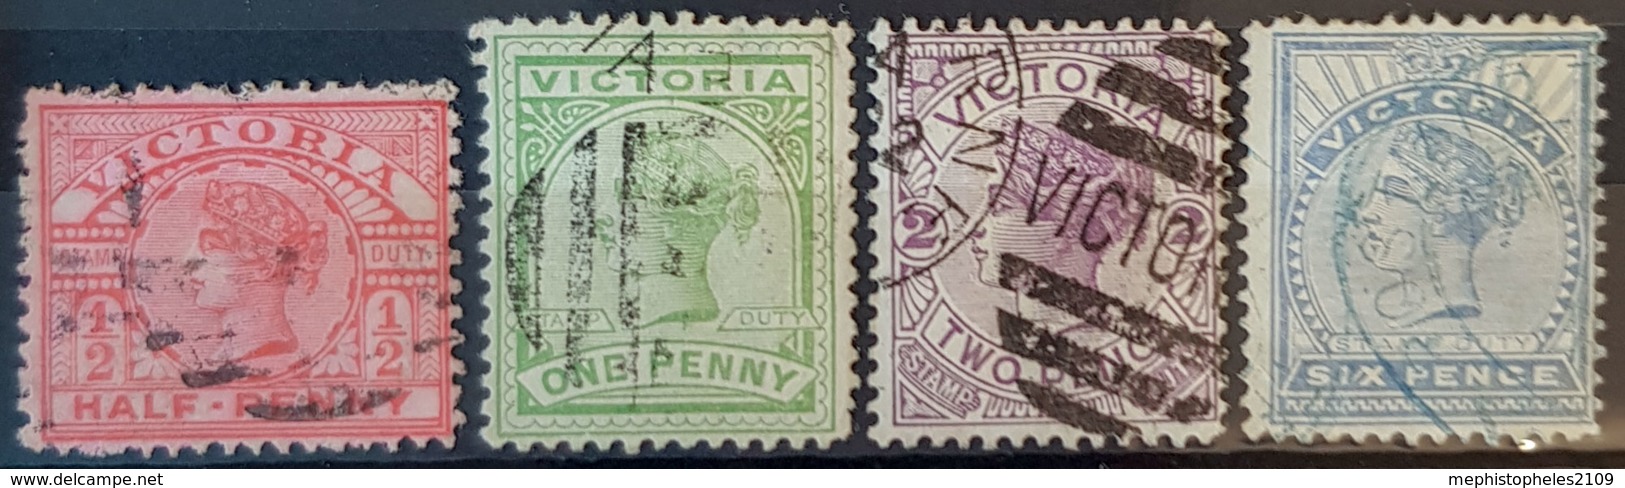 VICTORIA - Canceled - Sc# 160, 161, 162, 164 - Used Stamps